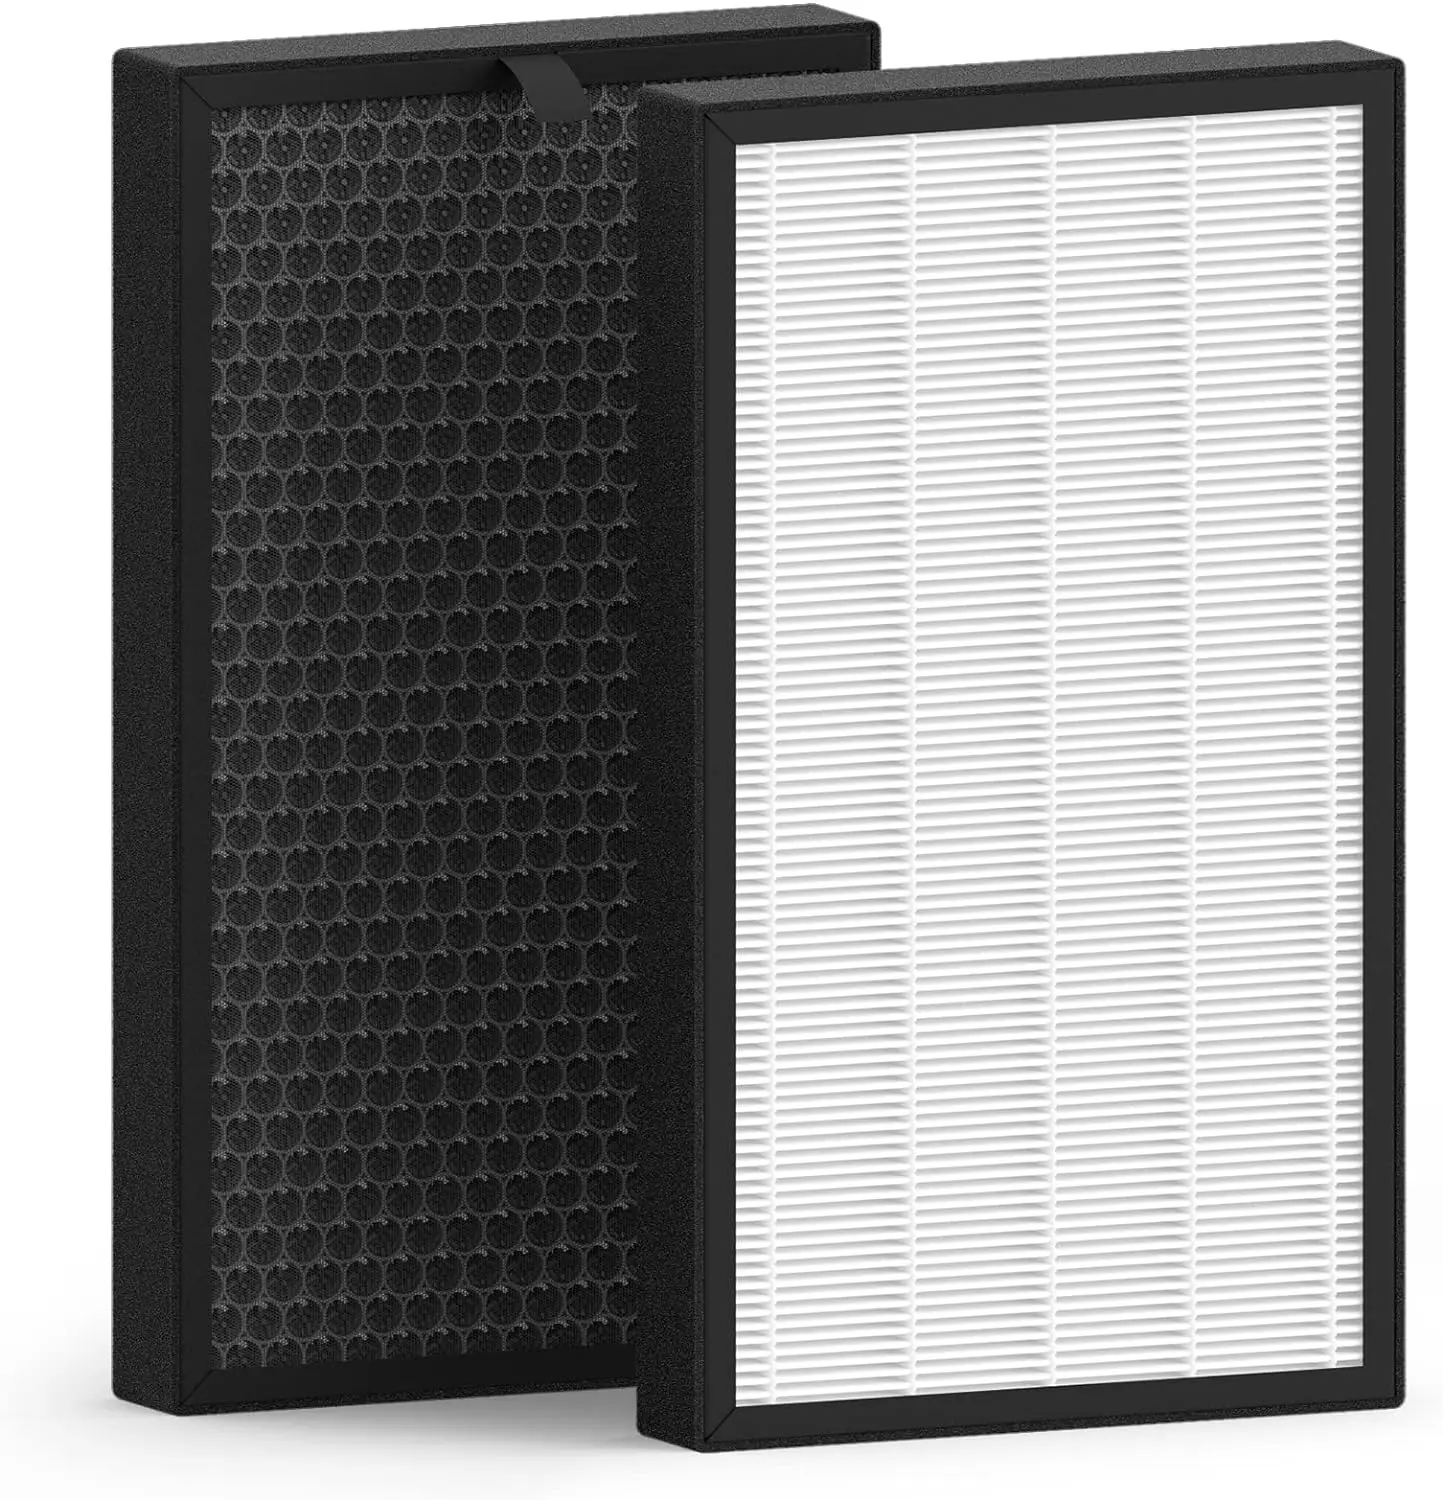 

Replacement Filter for TOSOT Air Cleaner Purifier KJ350G, True HEPA High-Efficiency Activated Carbon Filter, 2 Pack Essential oi